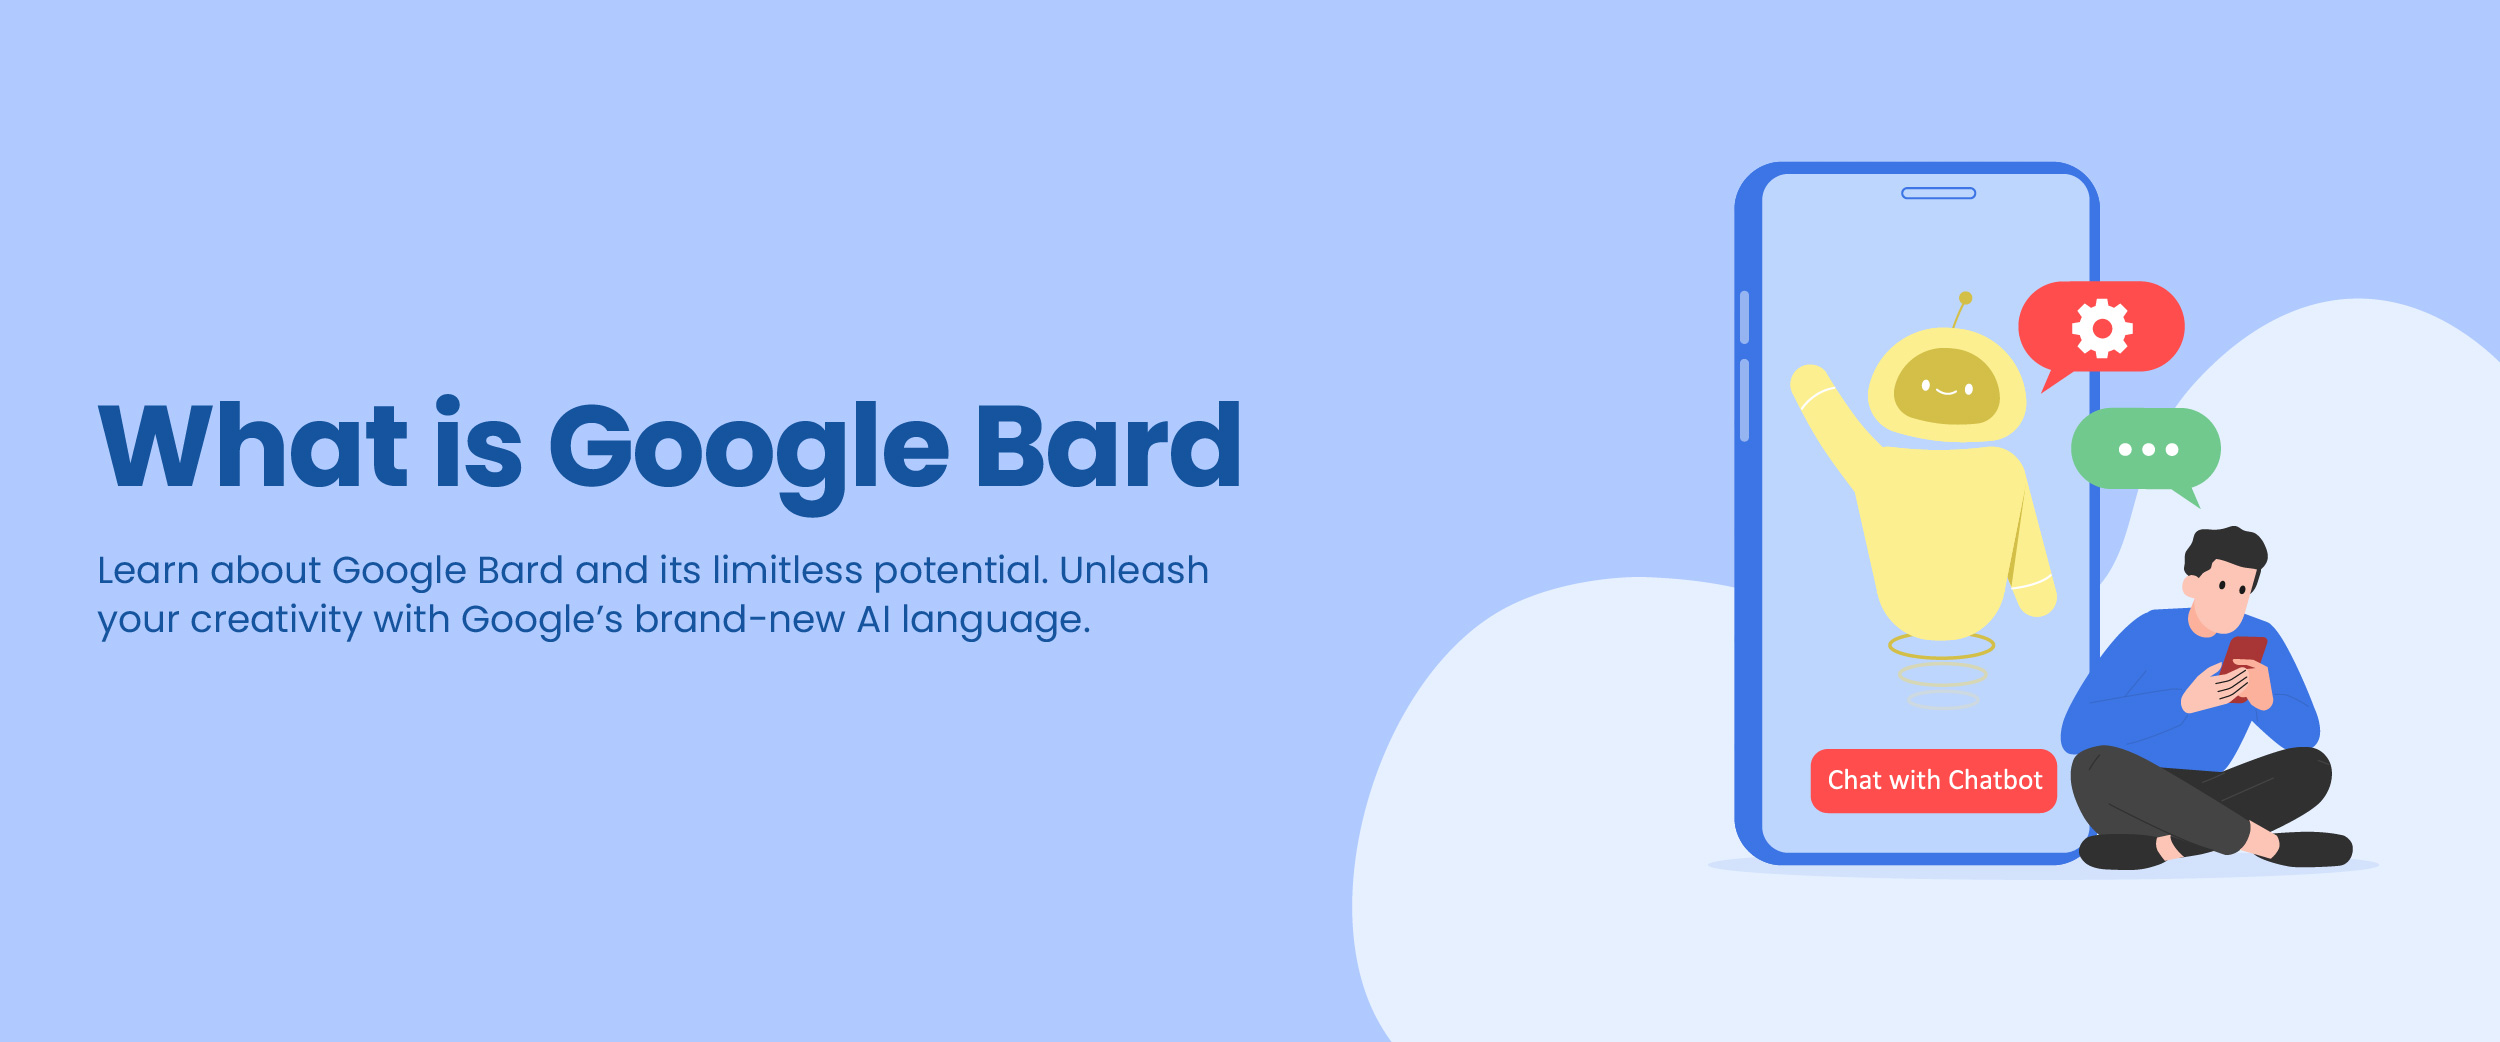 what is google bard